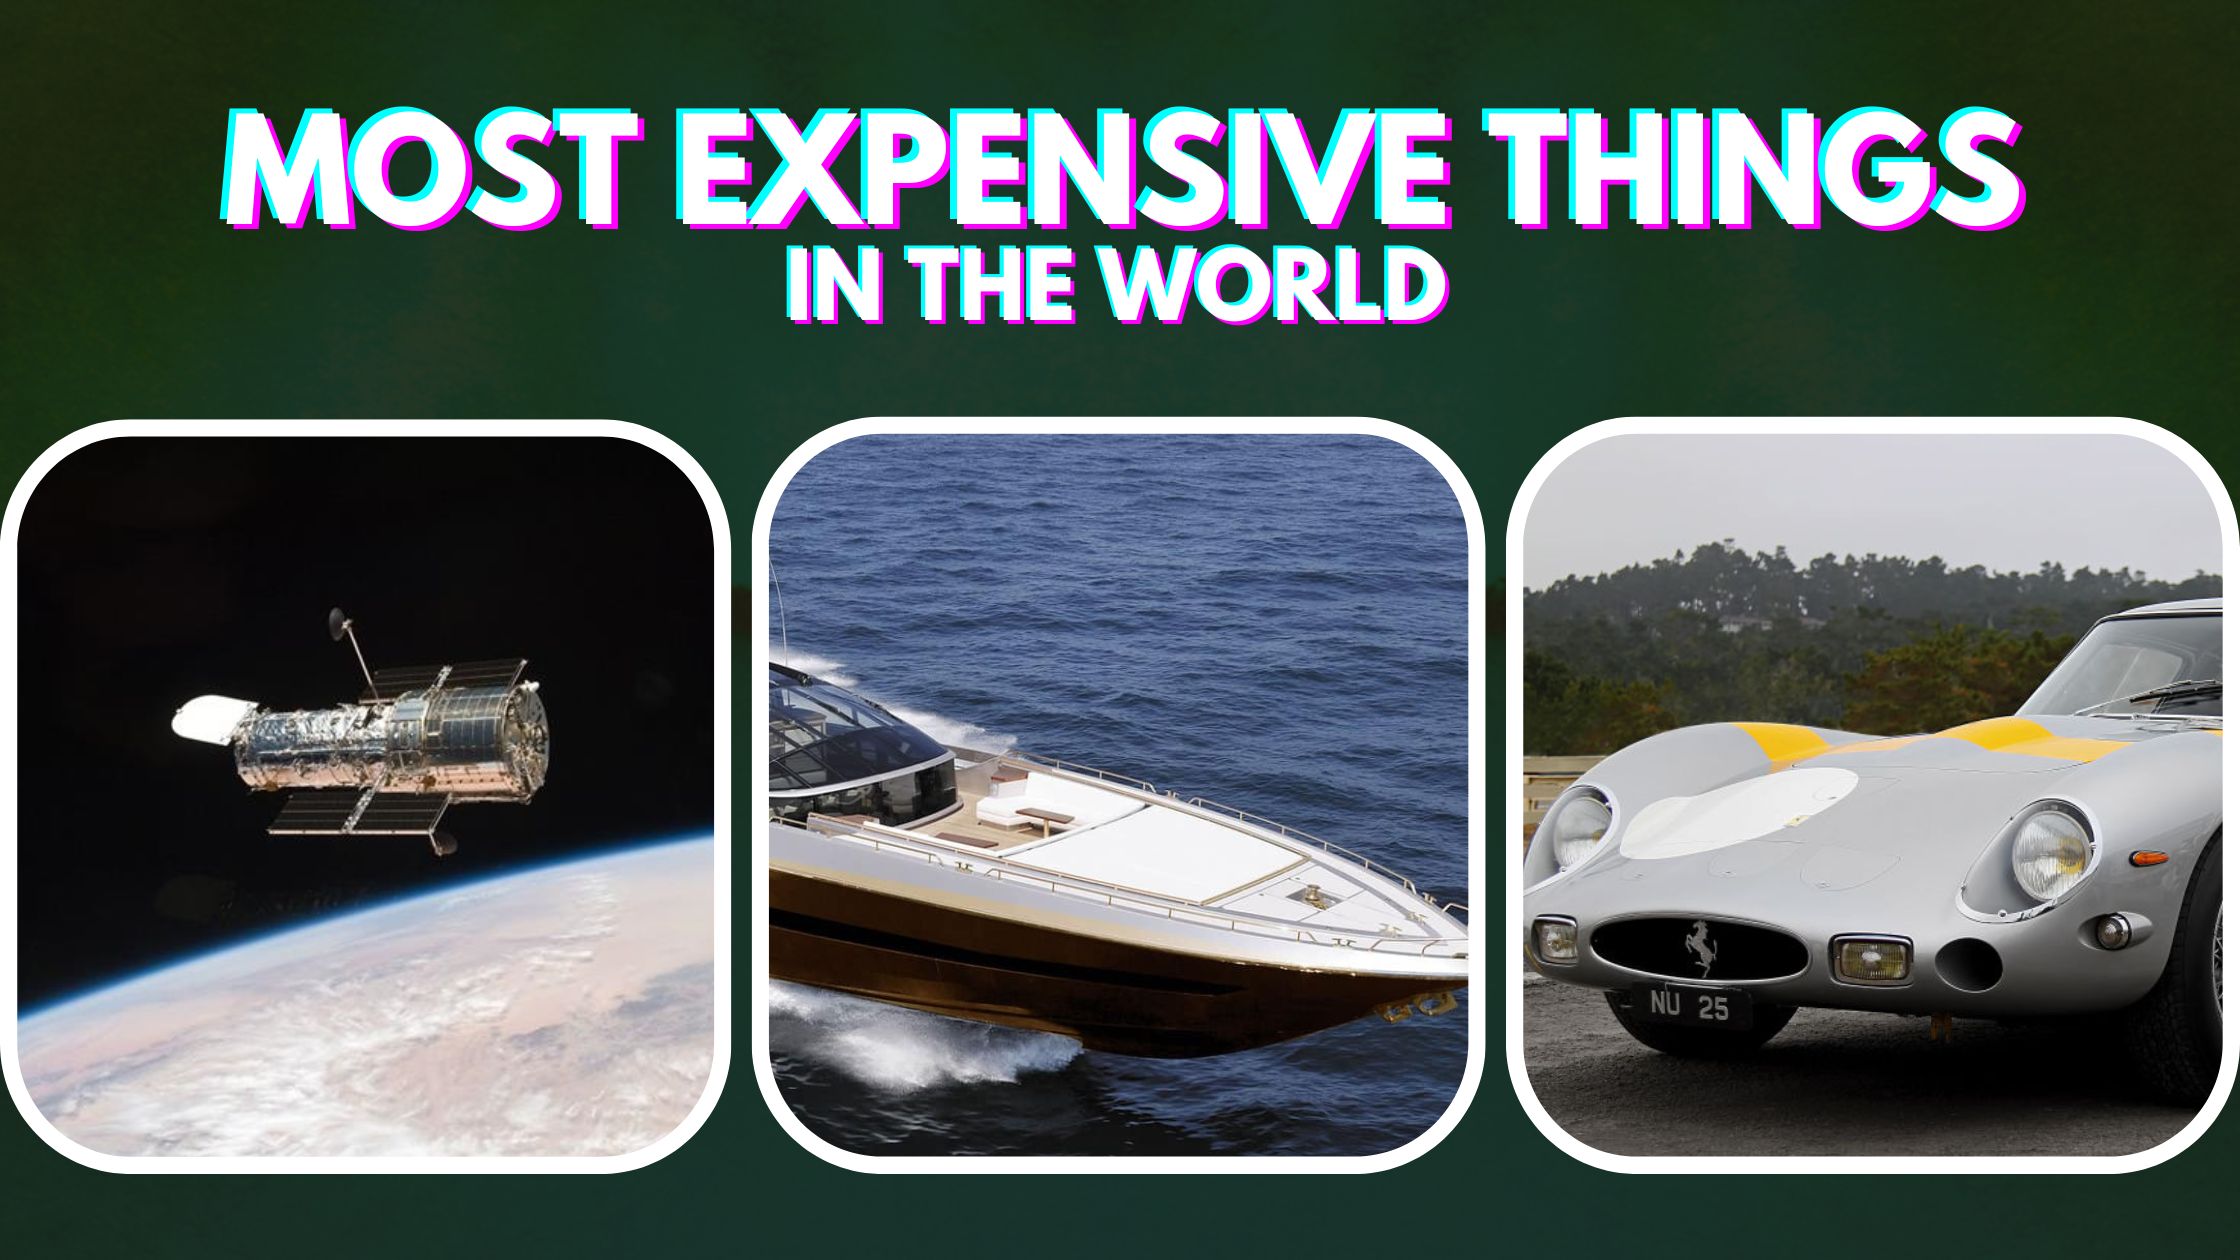 https://rnn.ng/wp-content/uploads/2022/07/Top-10-Most-Expensive-Things-In-The-World-2022.jpg